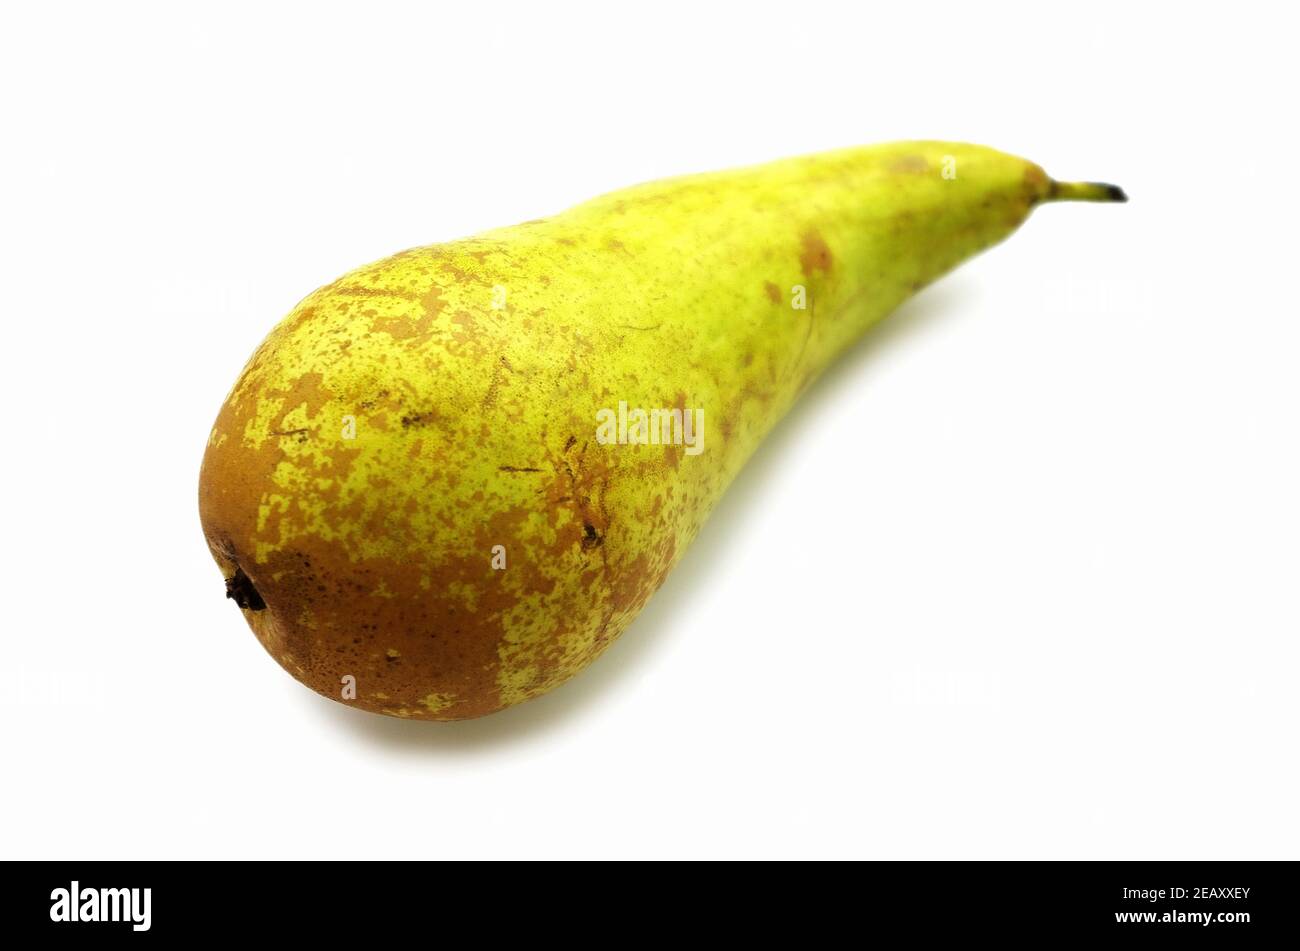 Fresh pear fruit isolated on the white background. Healthy lifestyle, food and diet concept. Stock Photo